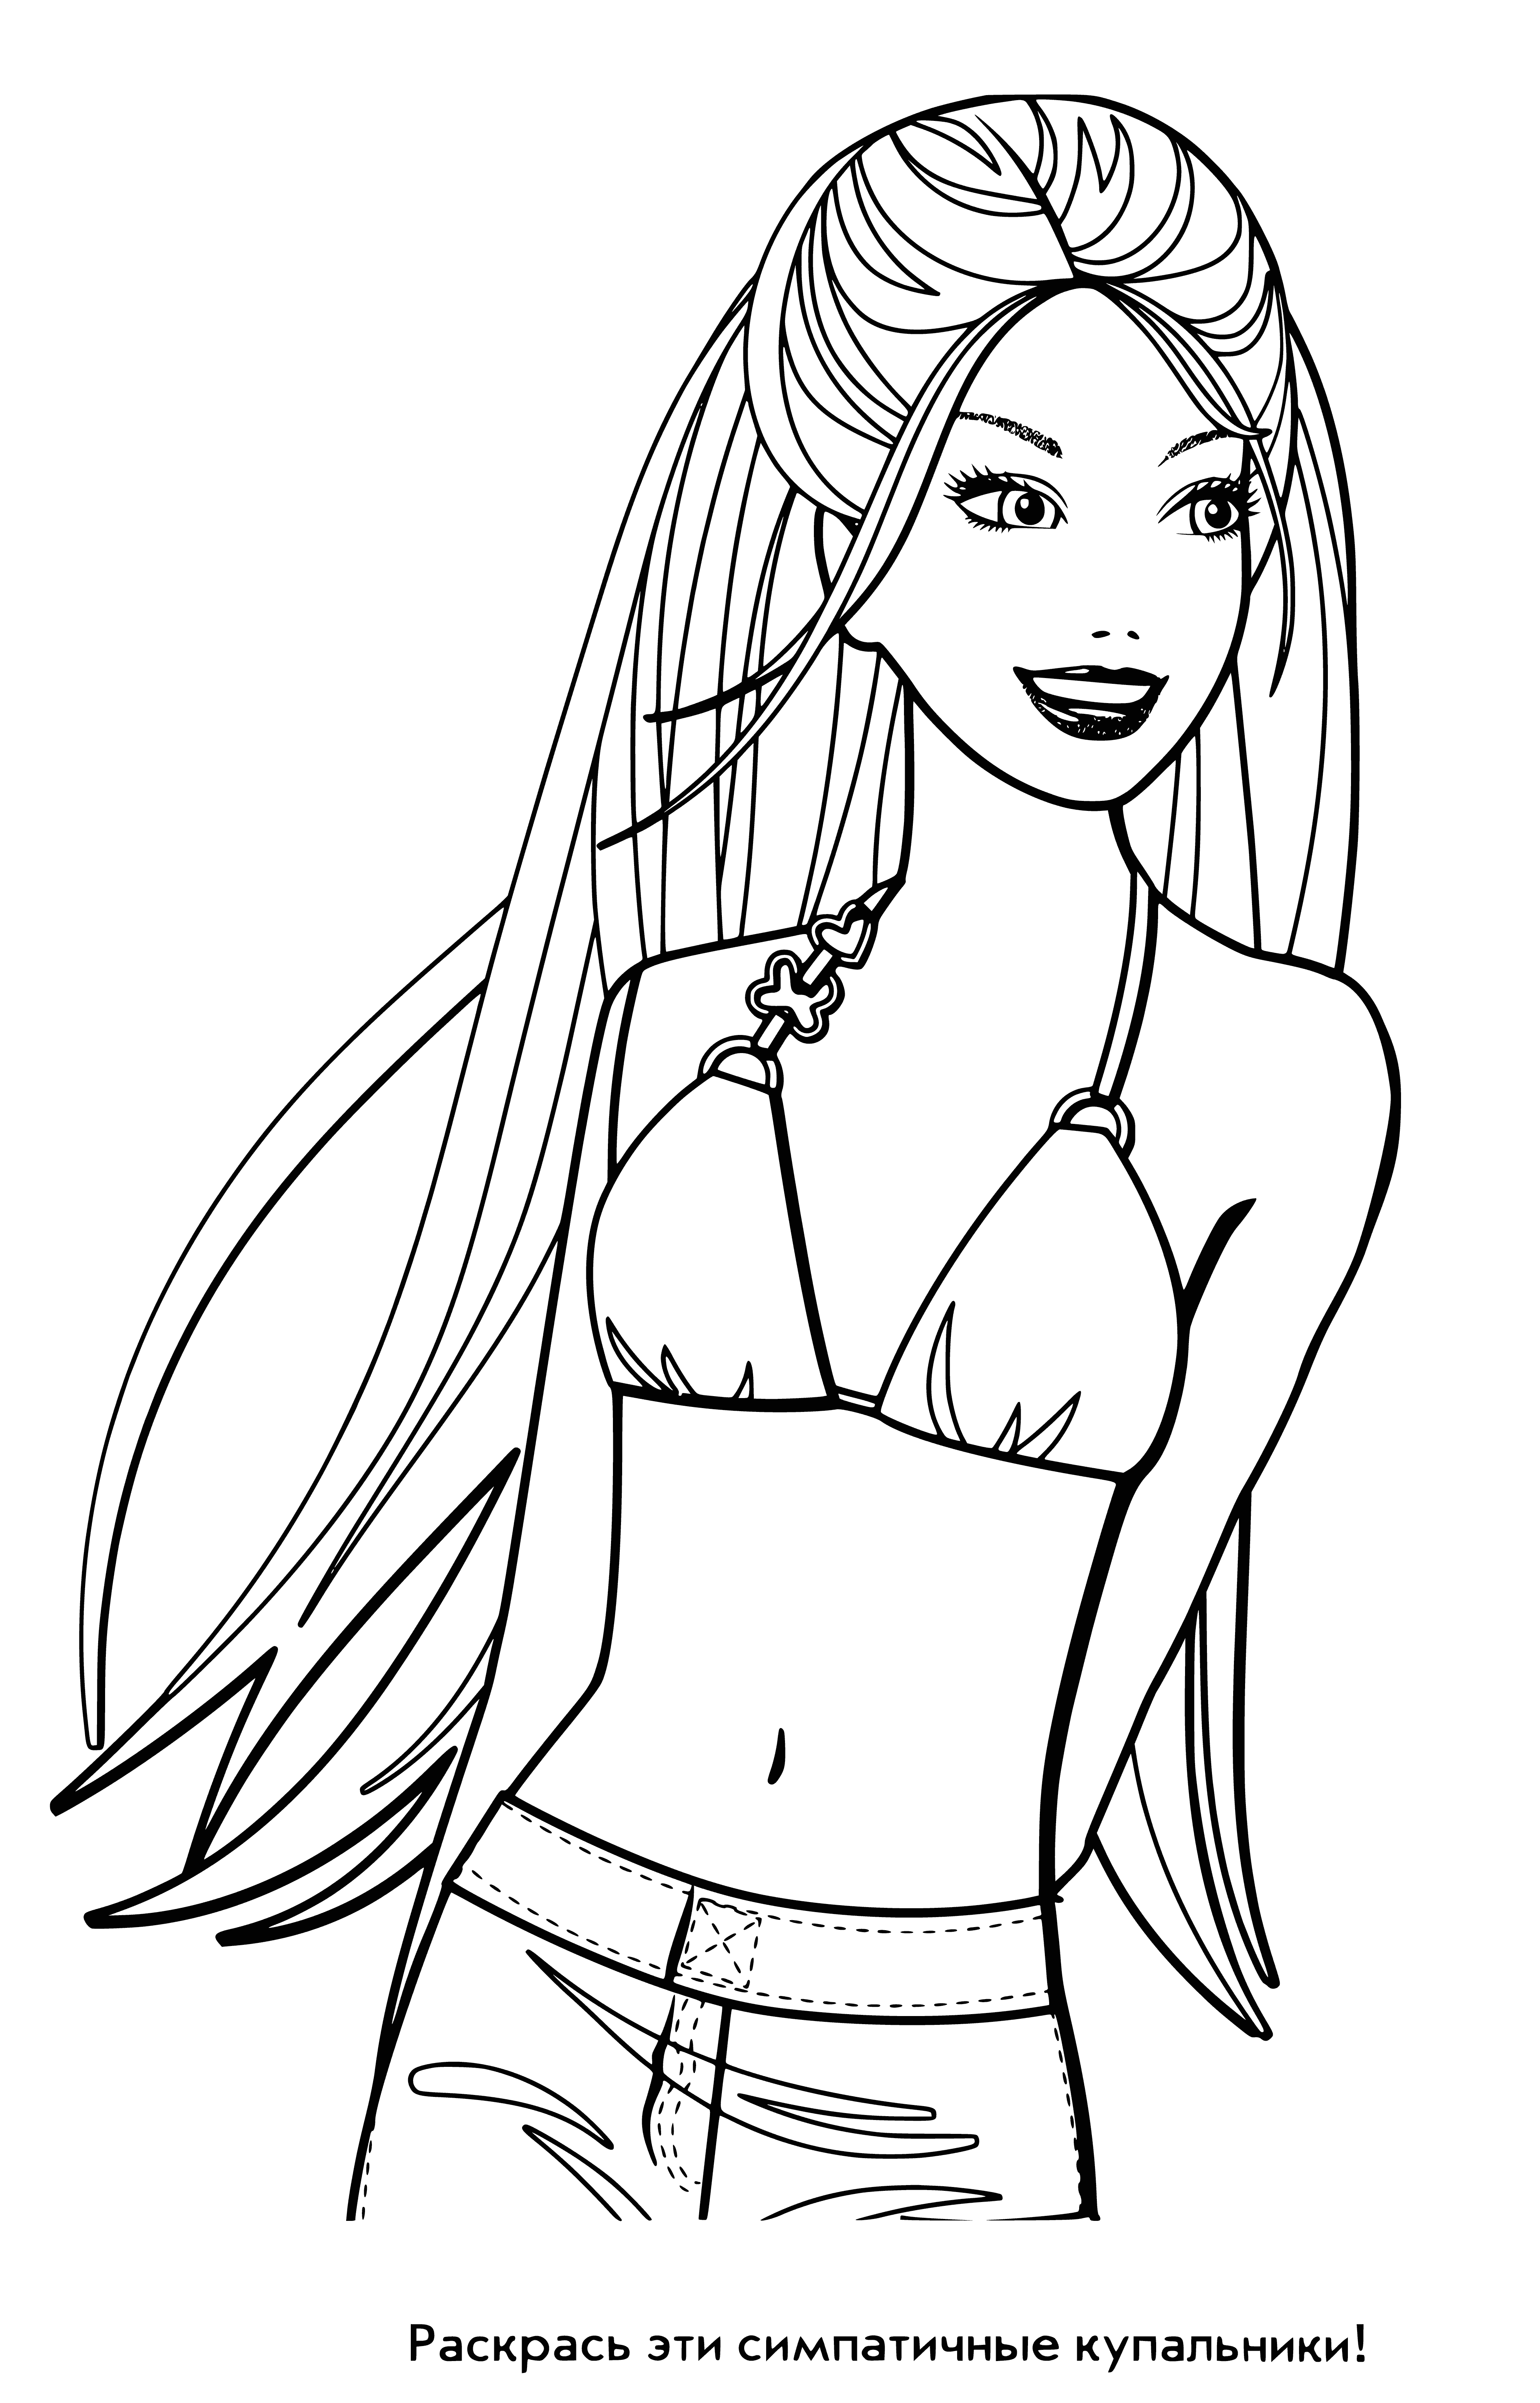 Swimsuit barbie coloring page